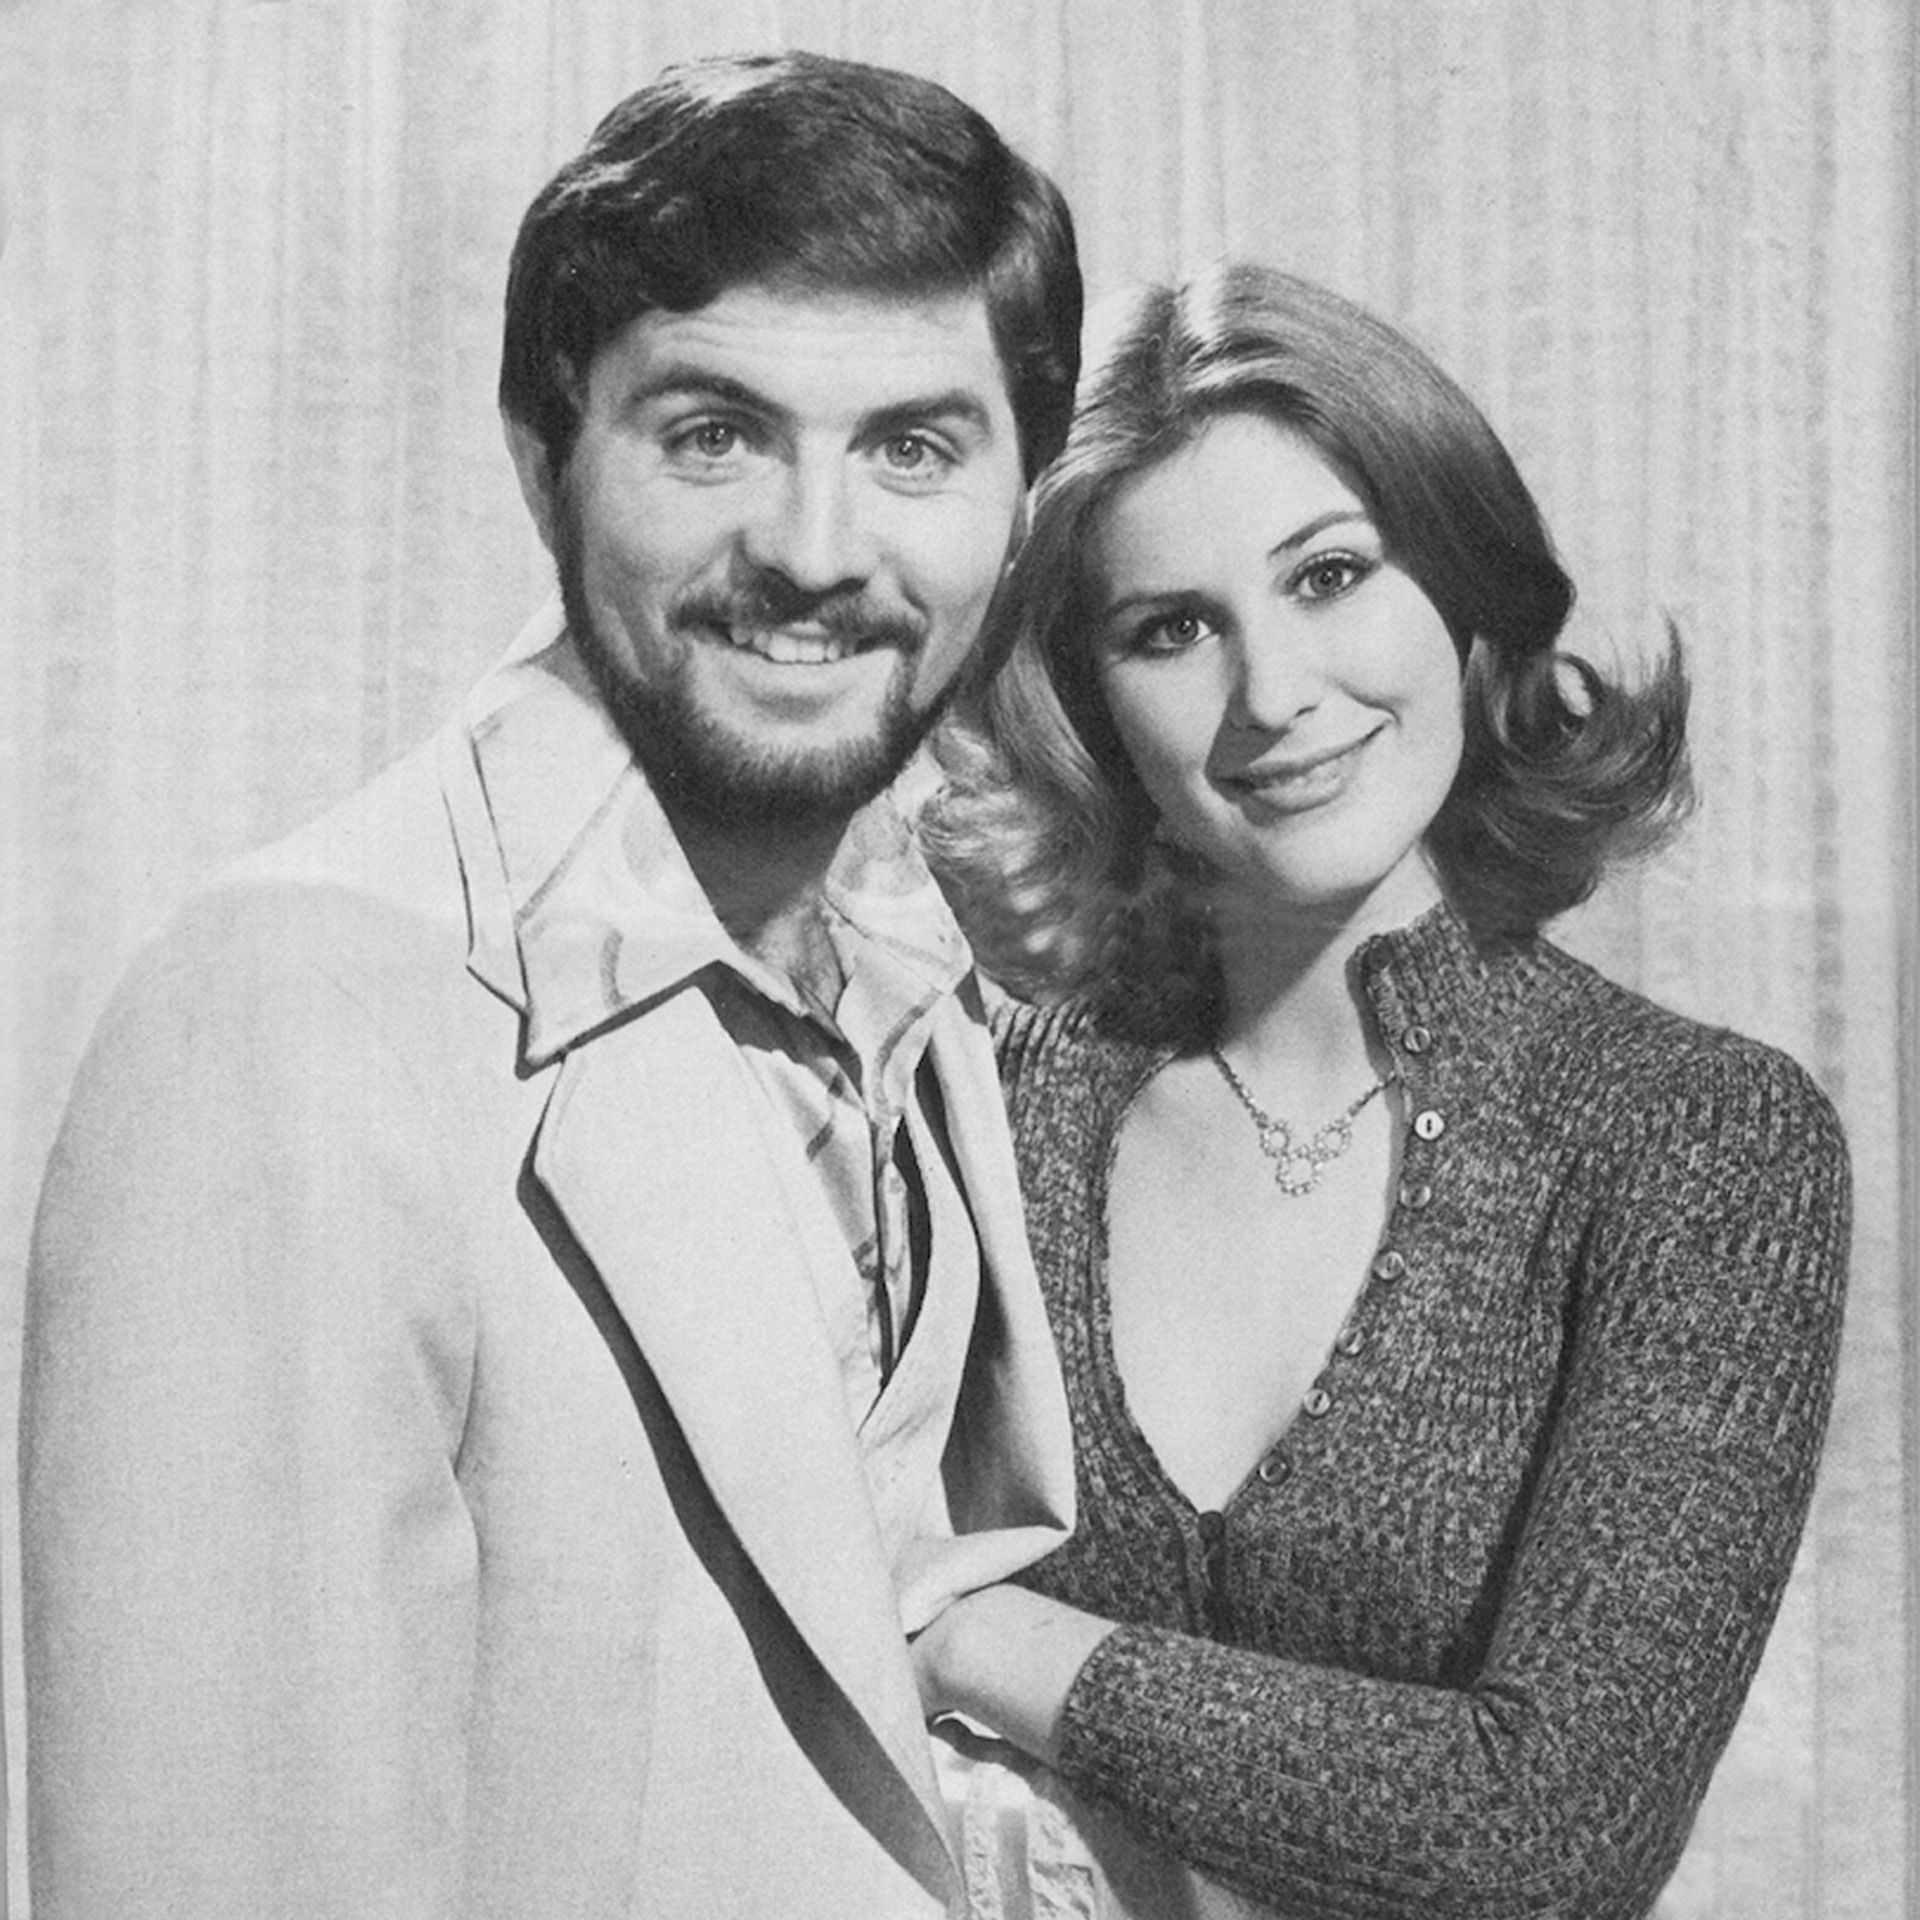 Jim and Carmen when they were magicians